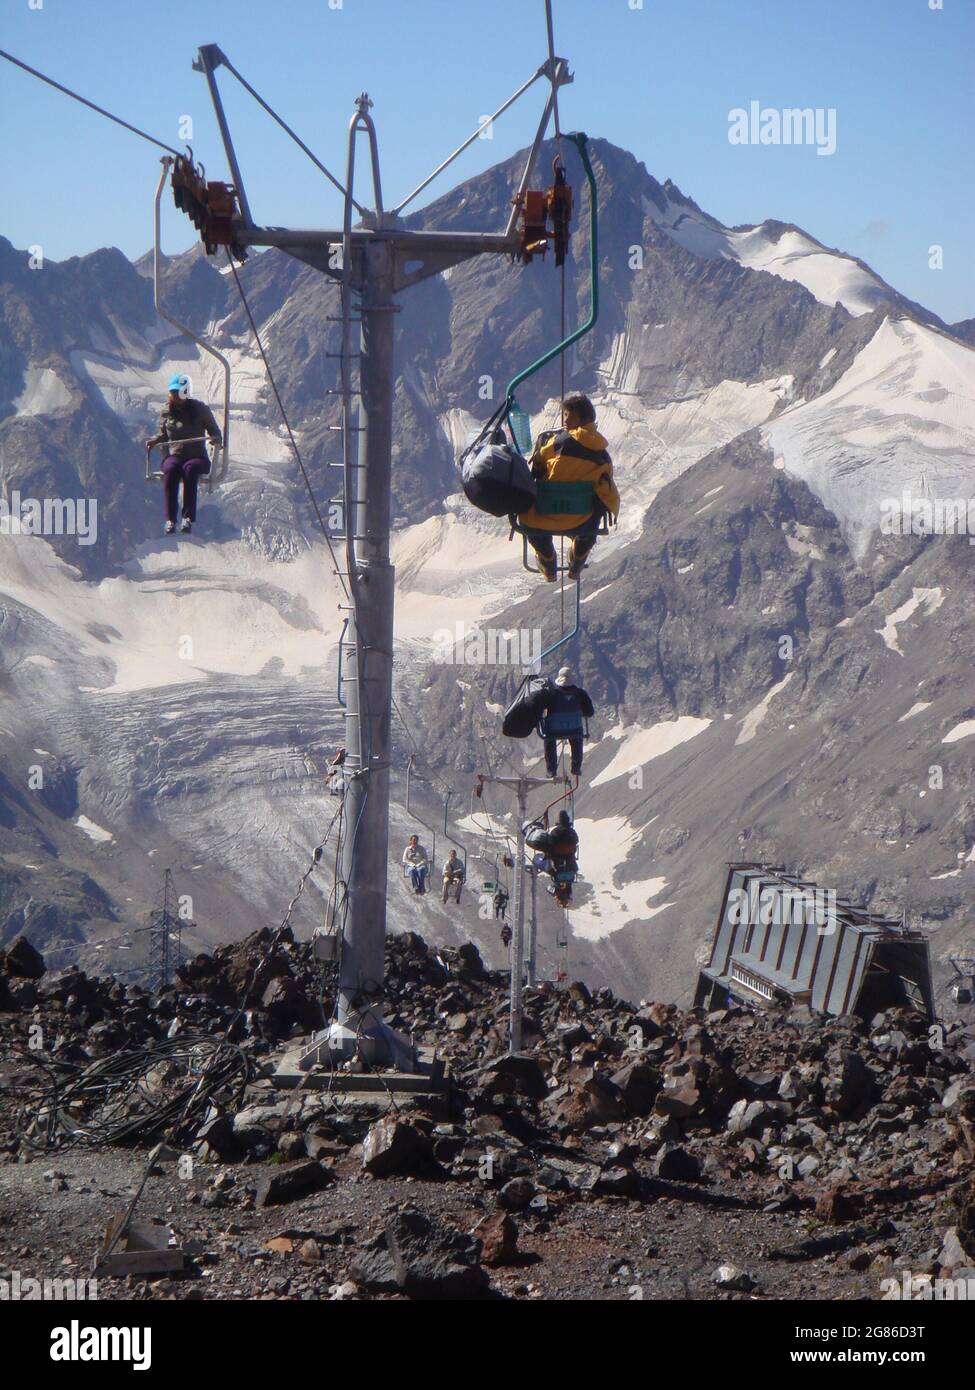 MINERALNYE VODY, RUSSIA - Aug 14, 2010: A beautiful view of Mir ski lift station on mount Elbrus, Russia Stock Photo